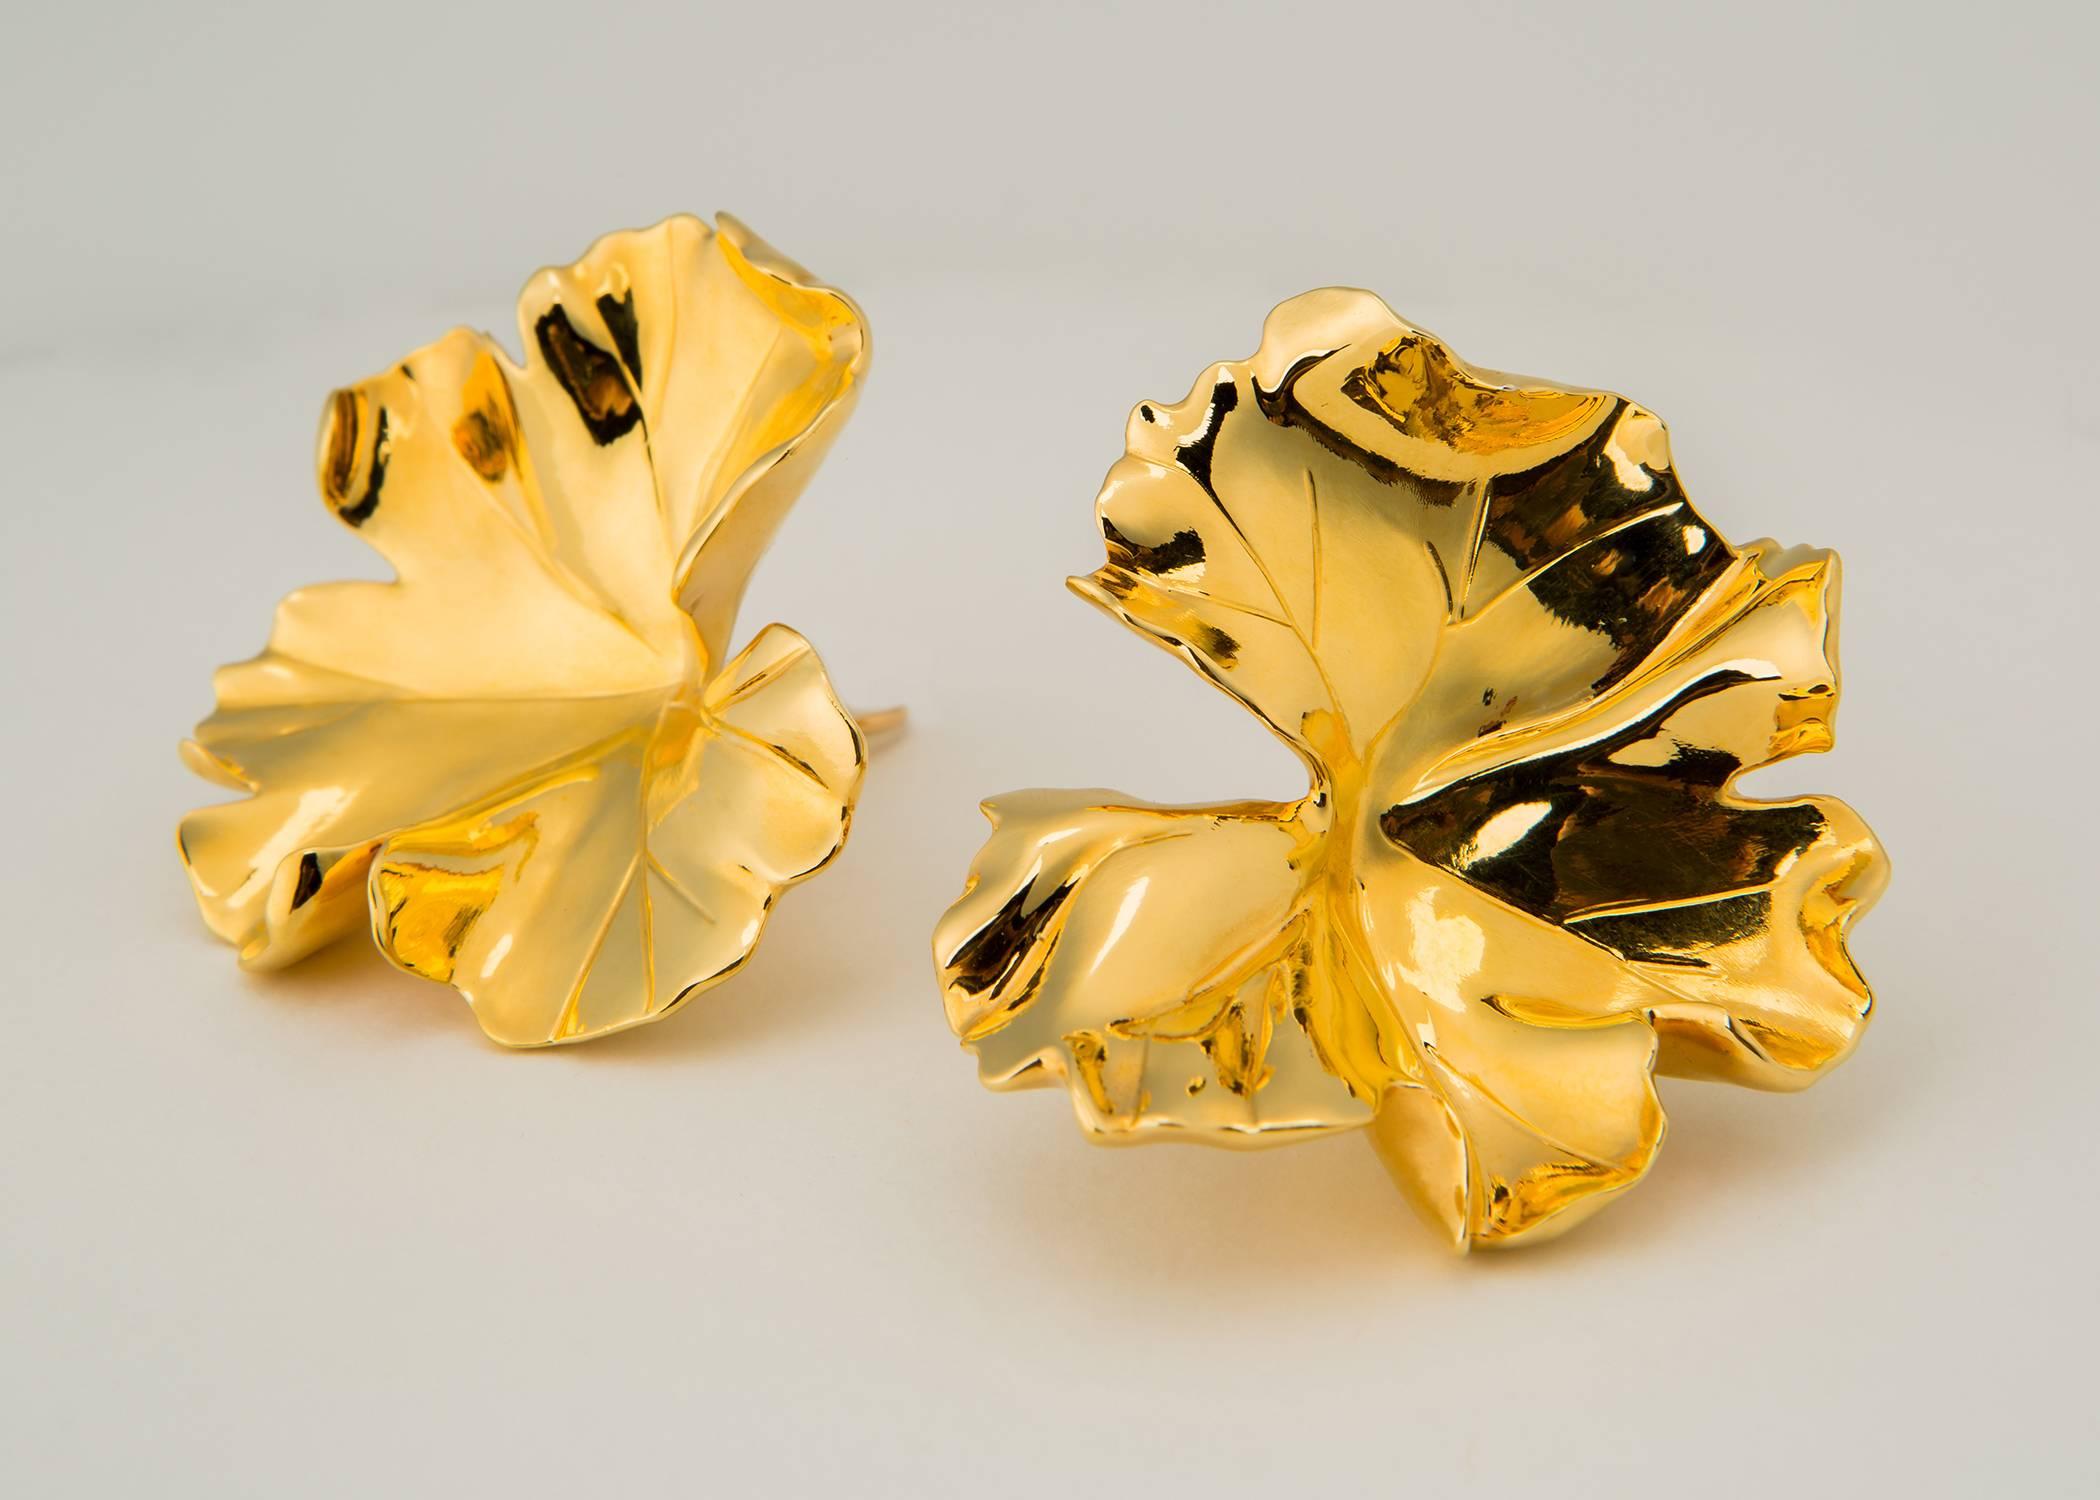 The only living jewelry designer to be honored at the Metropolitan Museum of Art. JAR ( Joel Arthur Rosenthal ) creates wearable sculpture using the simple shape of a geranium leaf. Rare and Collectable. Never worn in mint condition with original